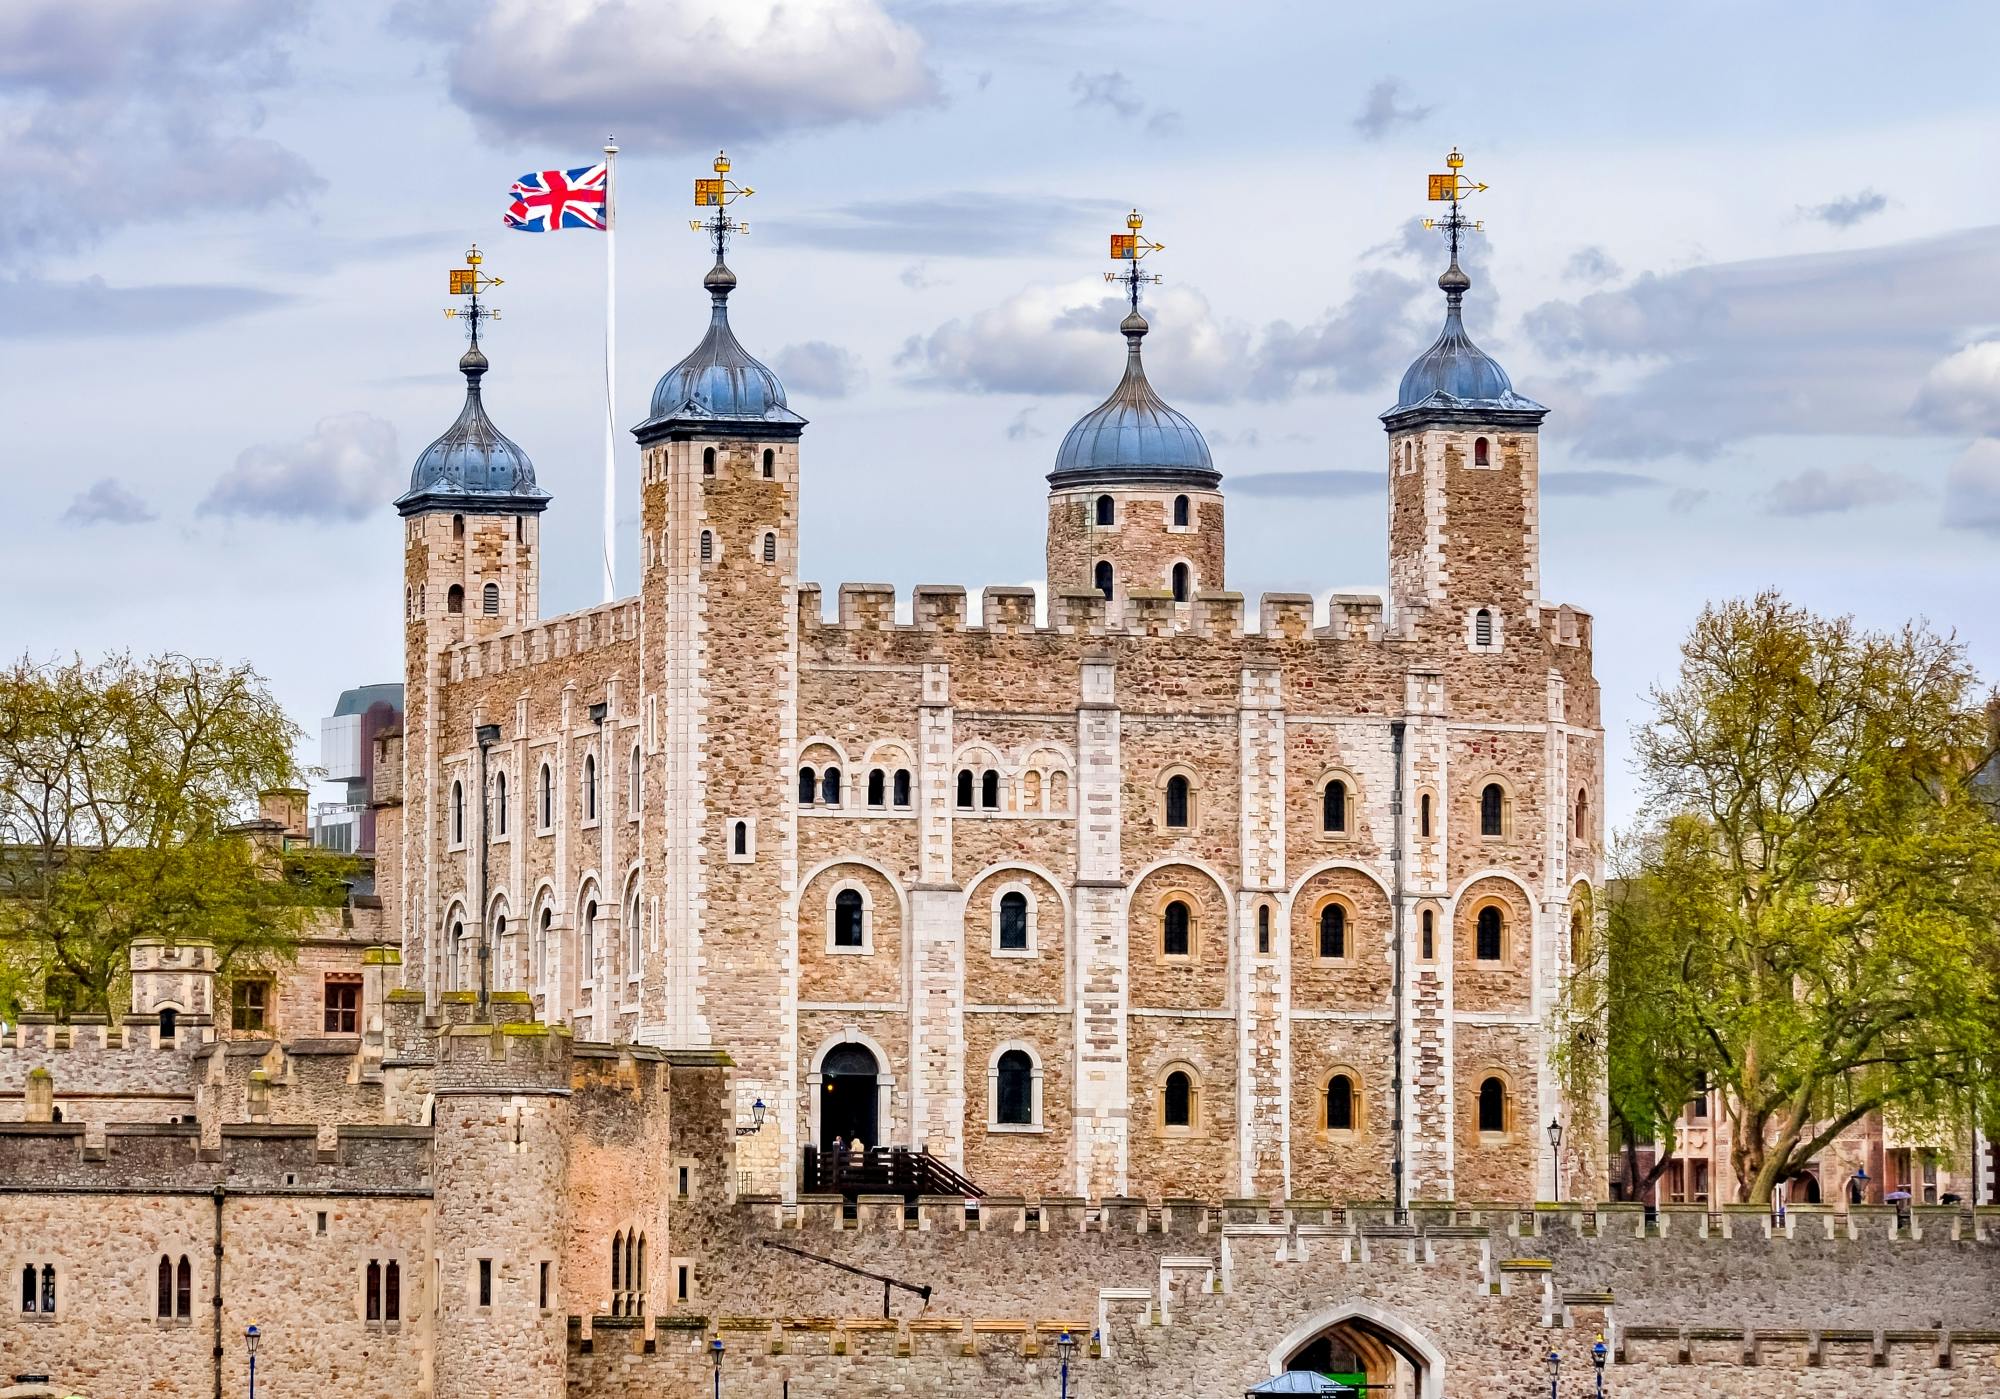 Harry Potter Walking Tour with Thames Cruise and Tower of London Musement